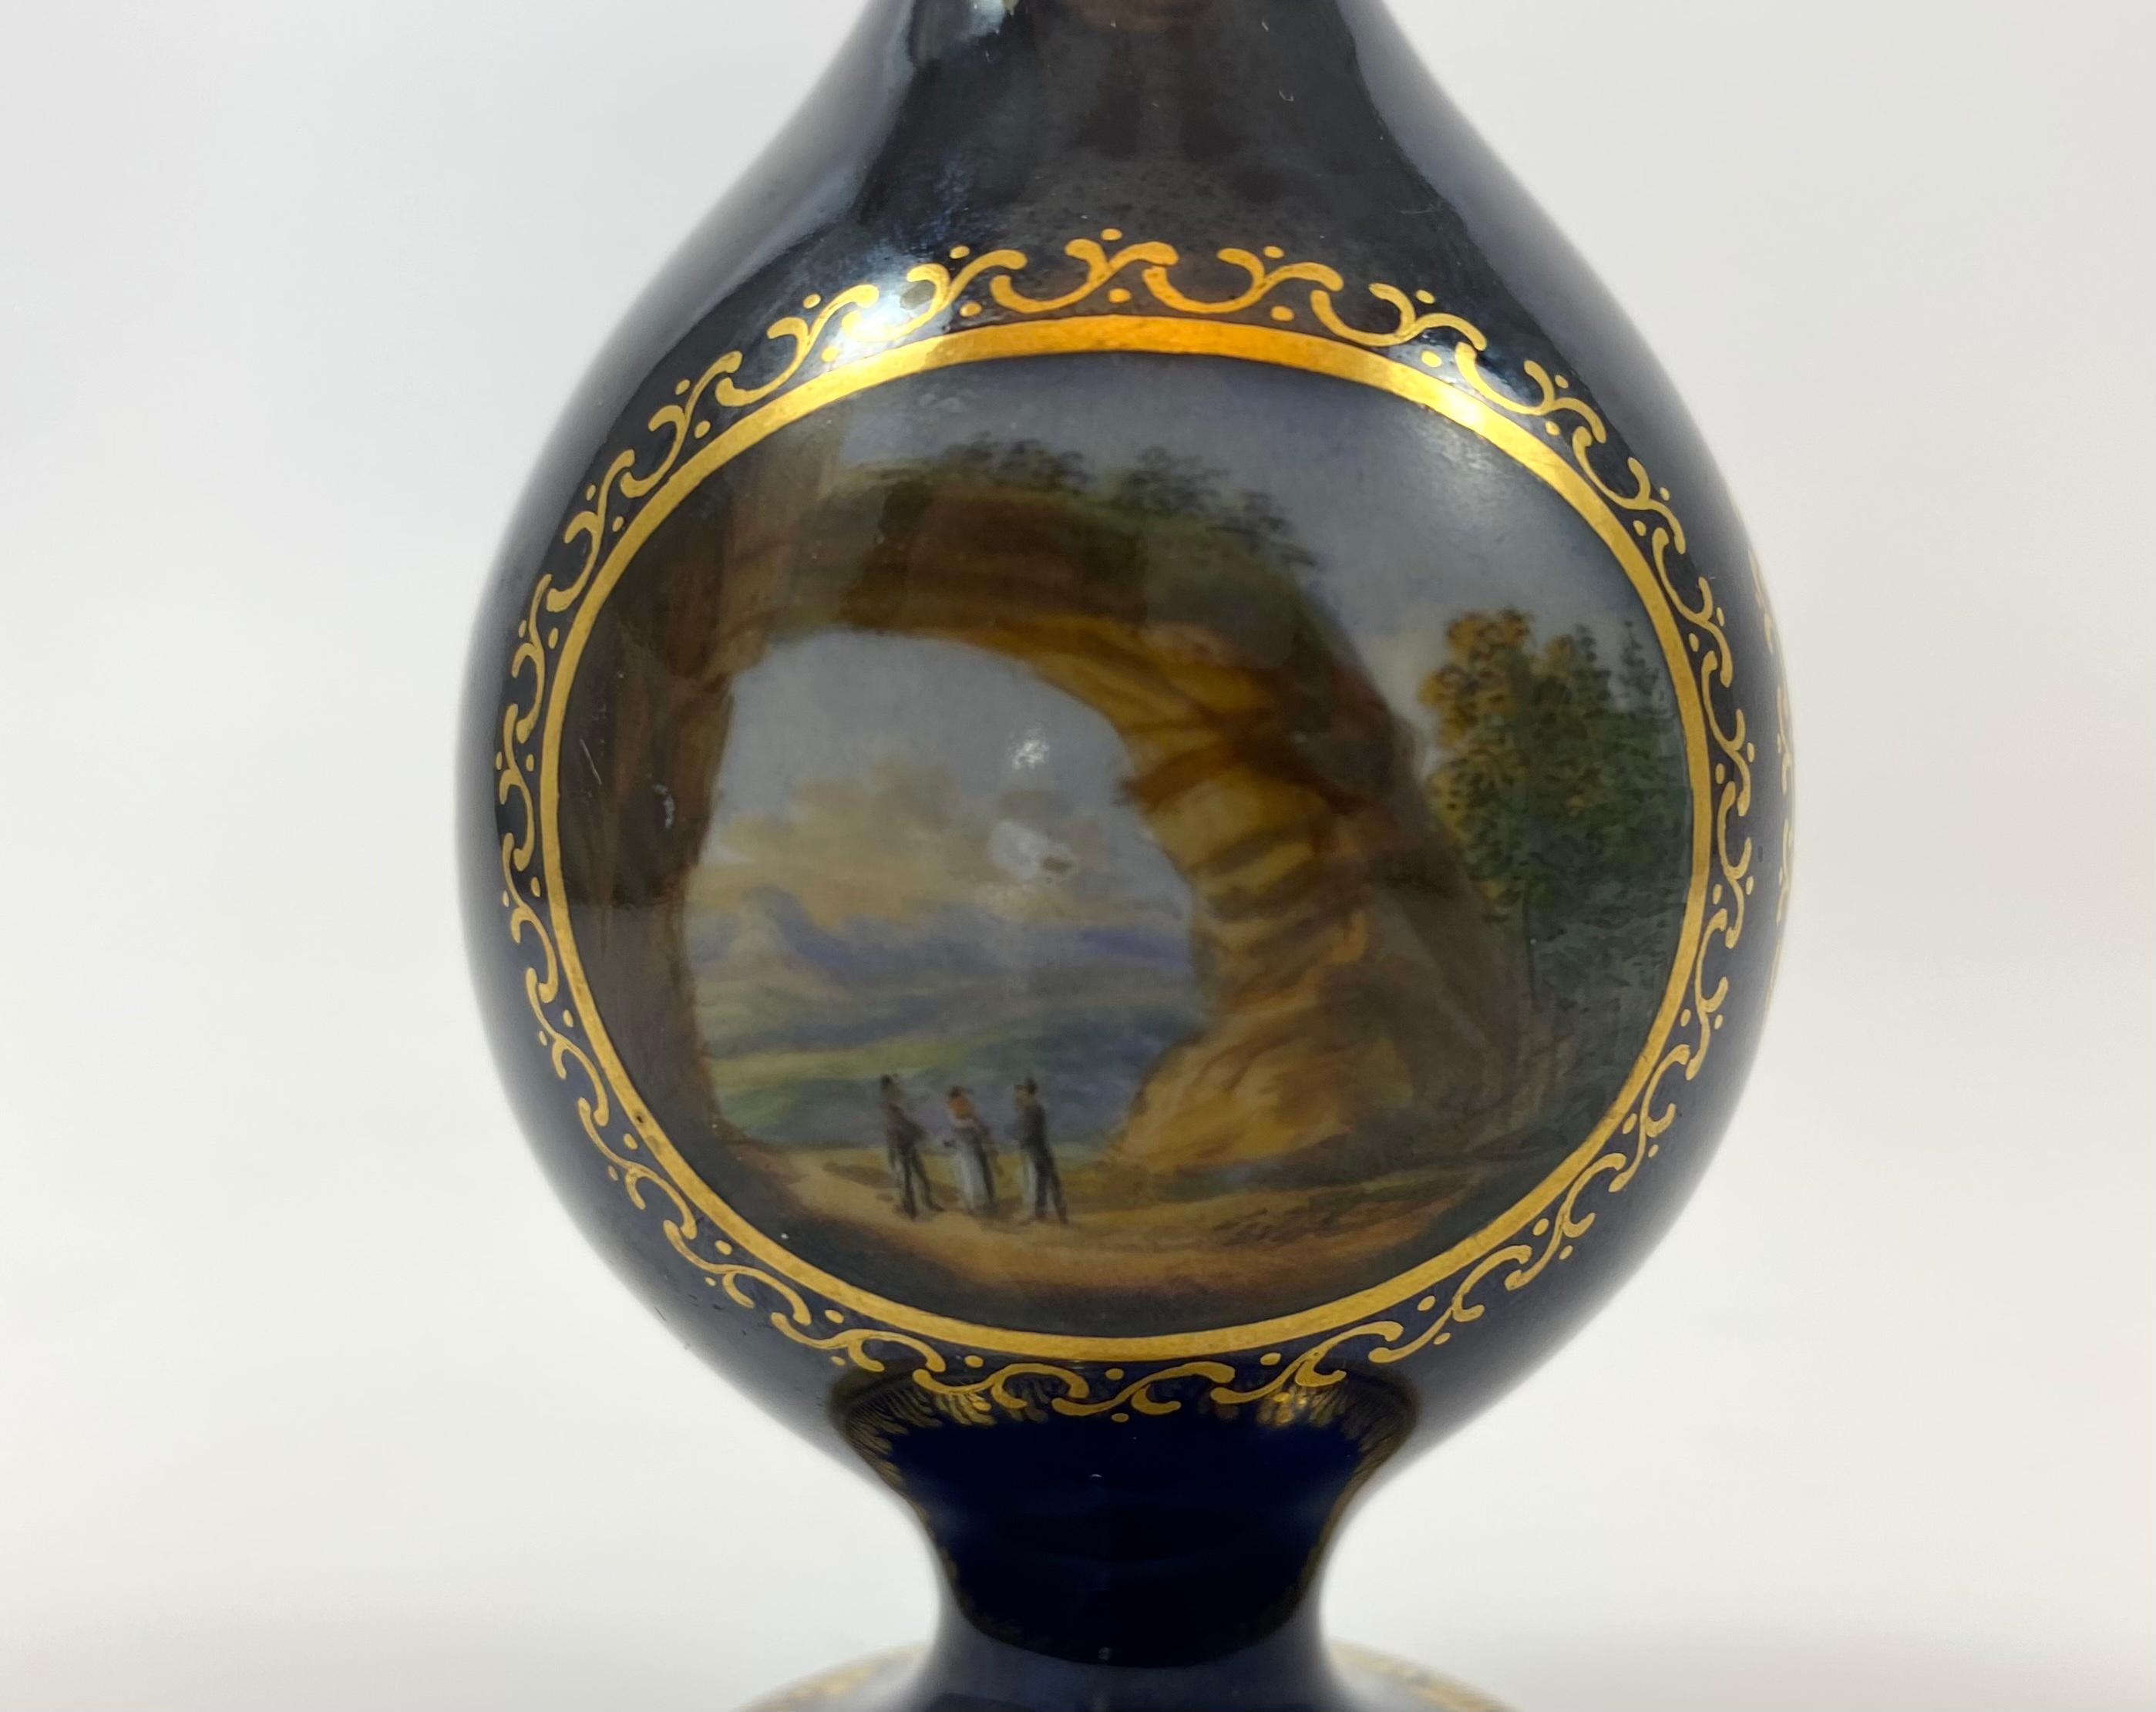 Meissen porcelain scent bottle, c. 1790, Marcolini Period. The scent bottle modelled after an Islamic rose water dropper, and hand painted with three gilt scroll panels, containing views in Germany. All on a cobalt blue ground.
Having the original